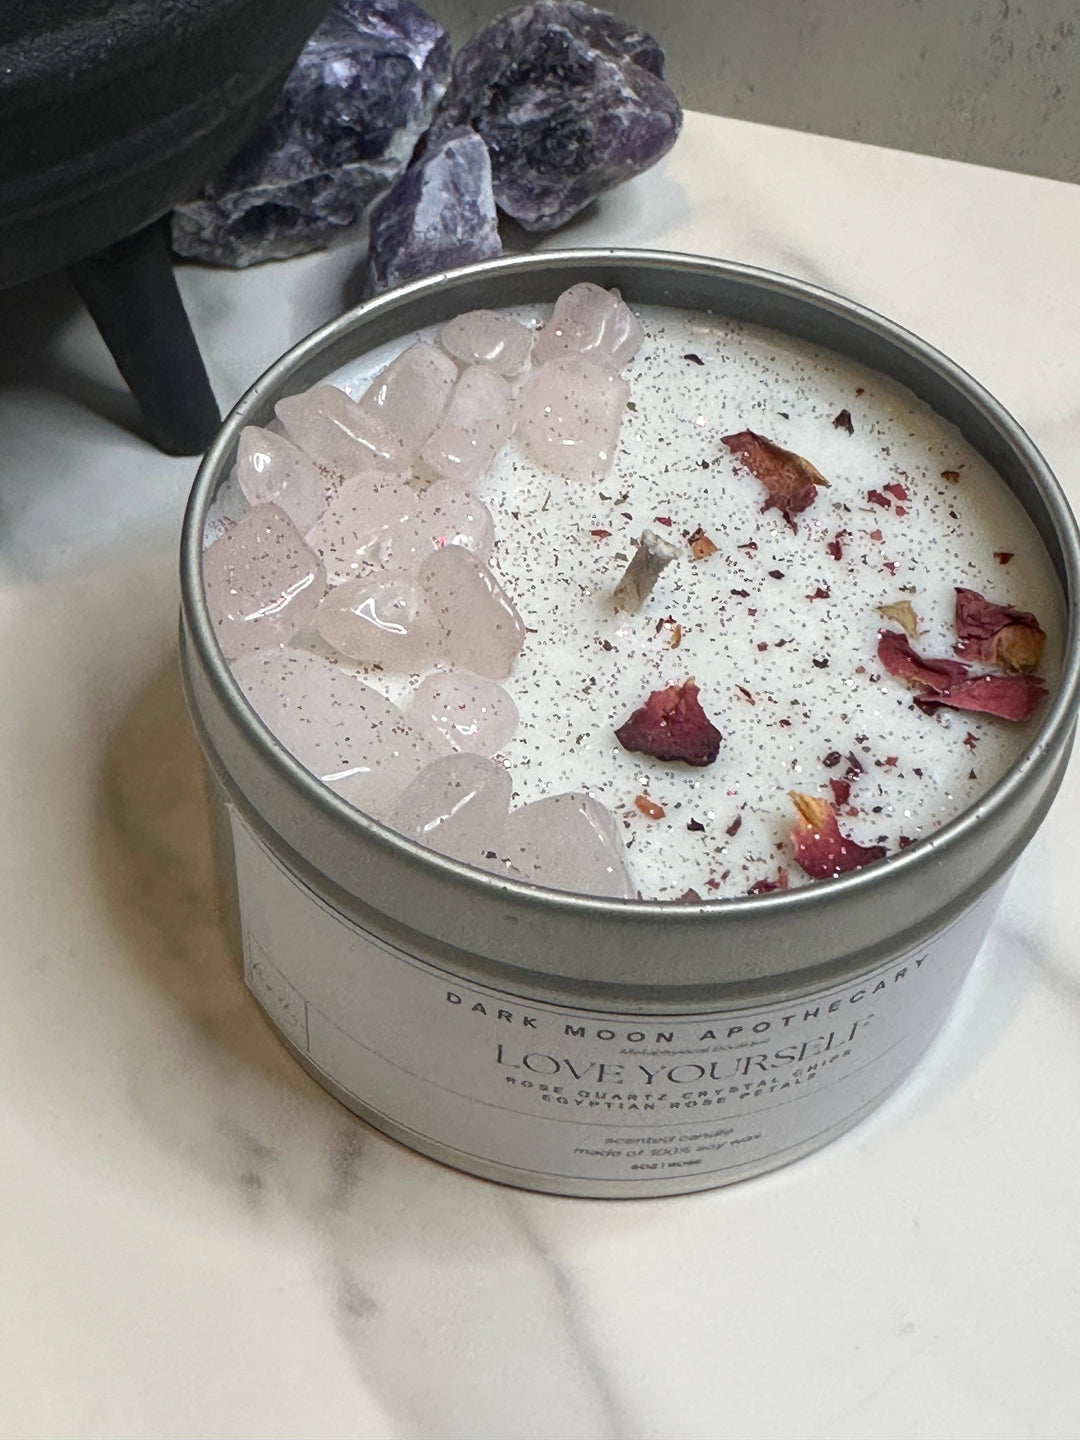 The Dark Moon Apothecary - Love Yourself soy crystal candle